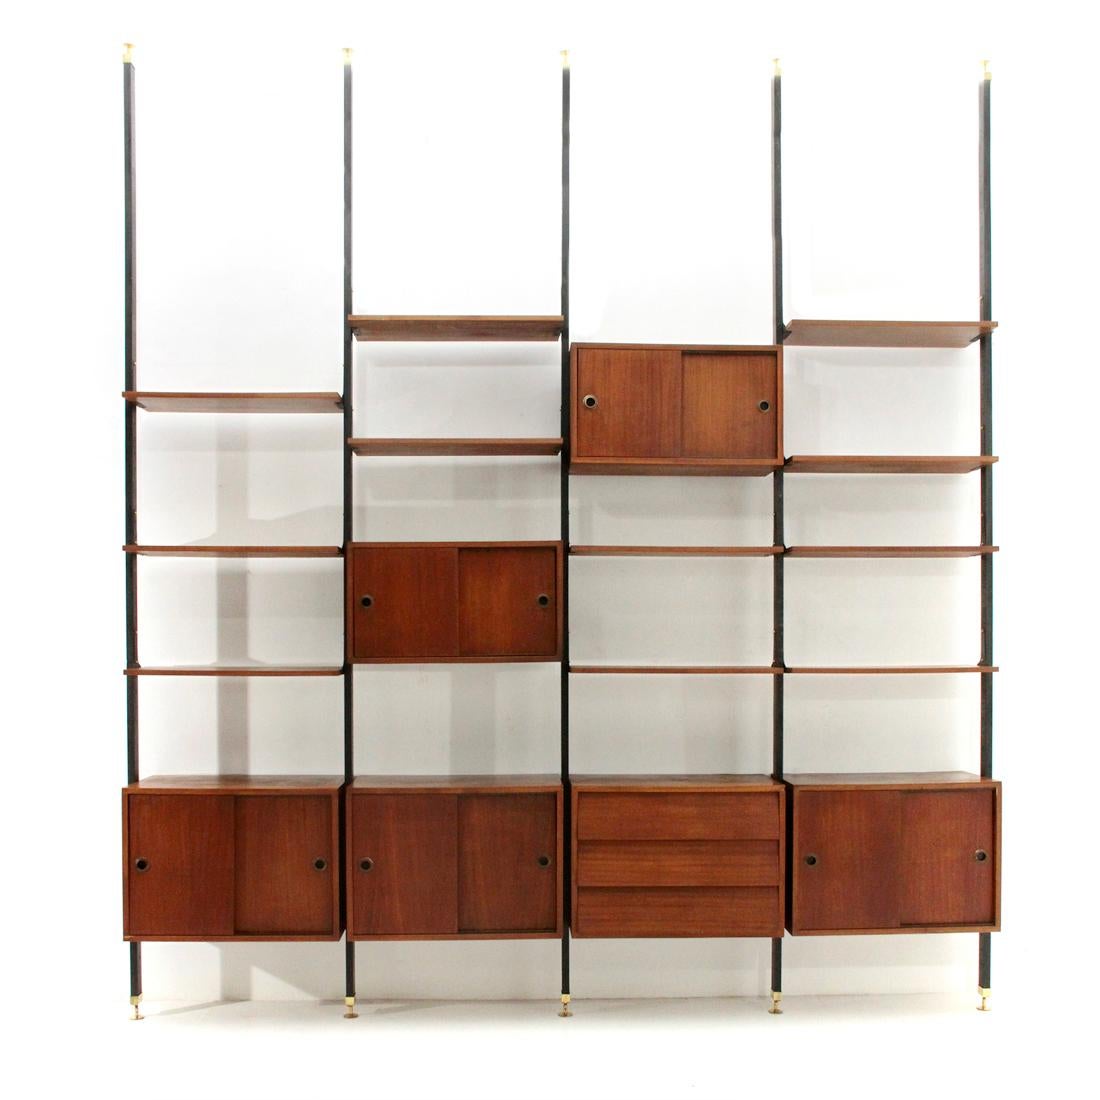 Italian manufacture wall unit produced in the 1960s.
Uprights in black painted metal box, height-adjustable brass feet.
Storage compartments and shelves in honeycomb veneered teak.
Handles in black painted brass.
Drawers with burglary